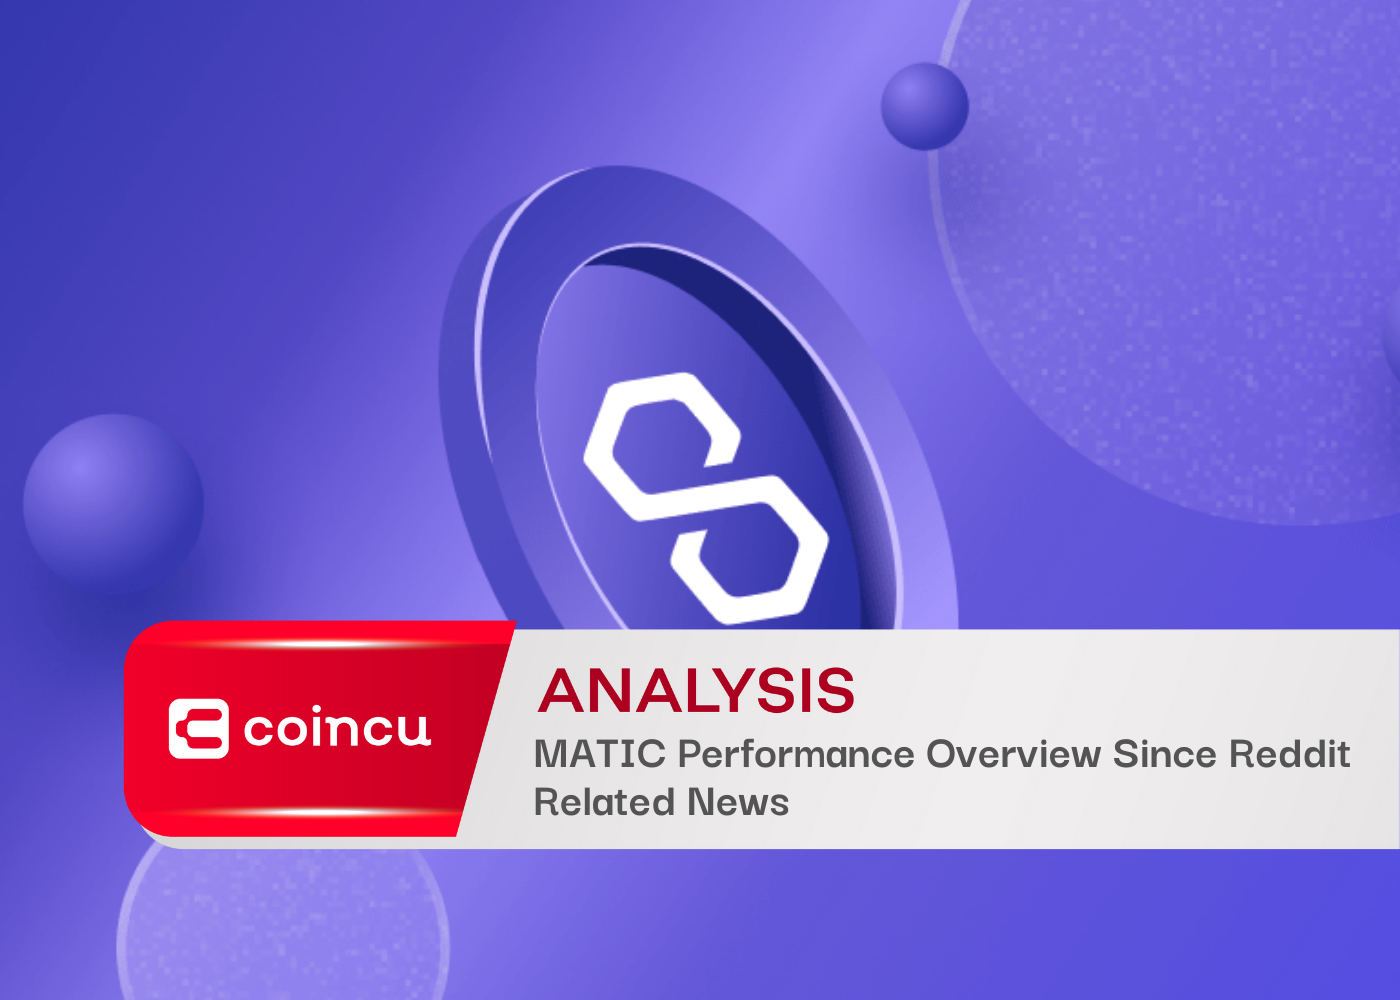 MATIC Performance Overview Since Reddit Related News